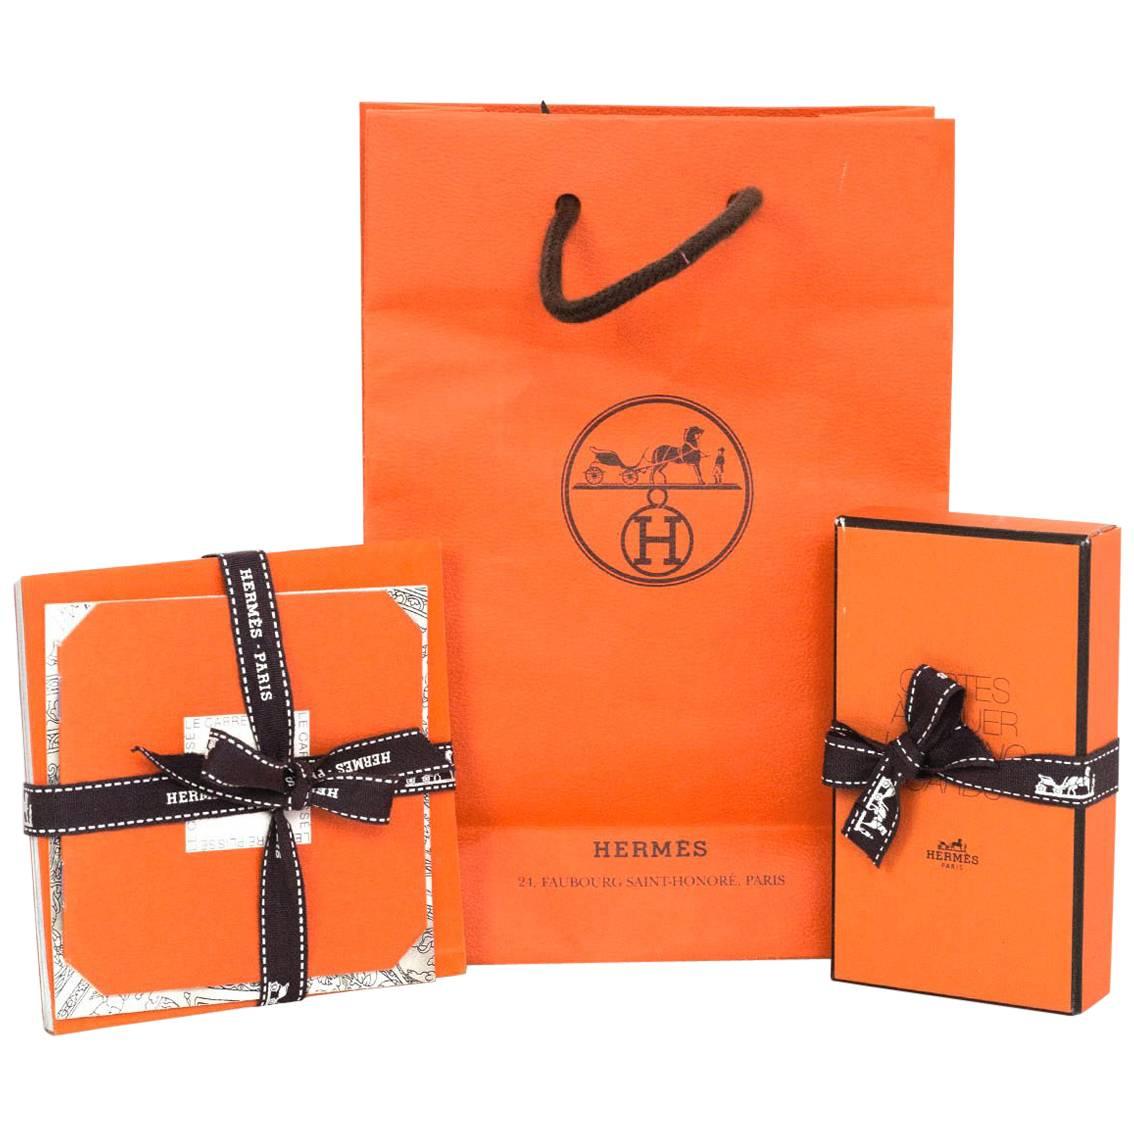 Hermes Scarf Knotting Cards and Booklets with Shopping Bag